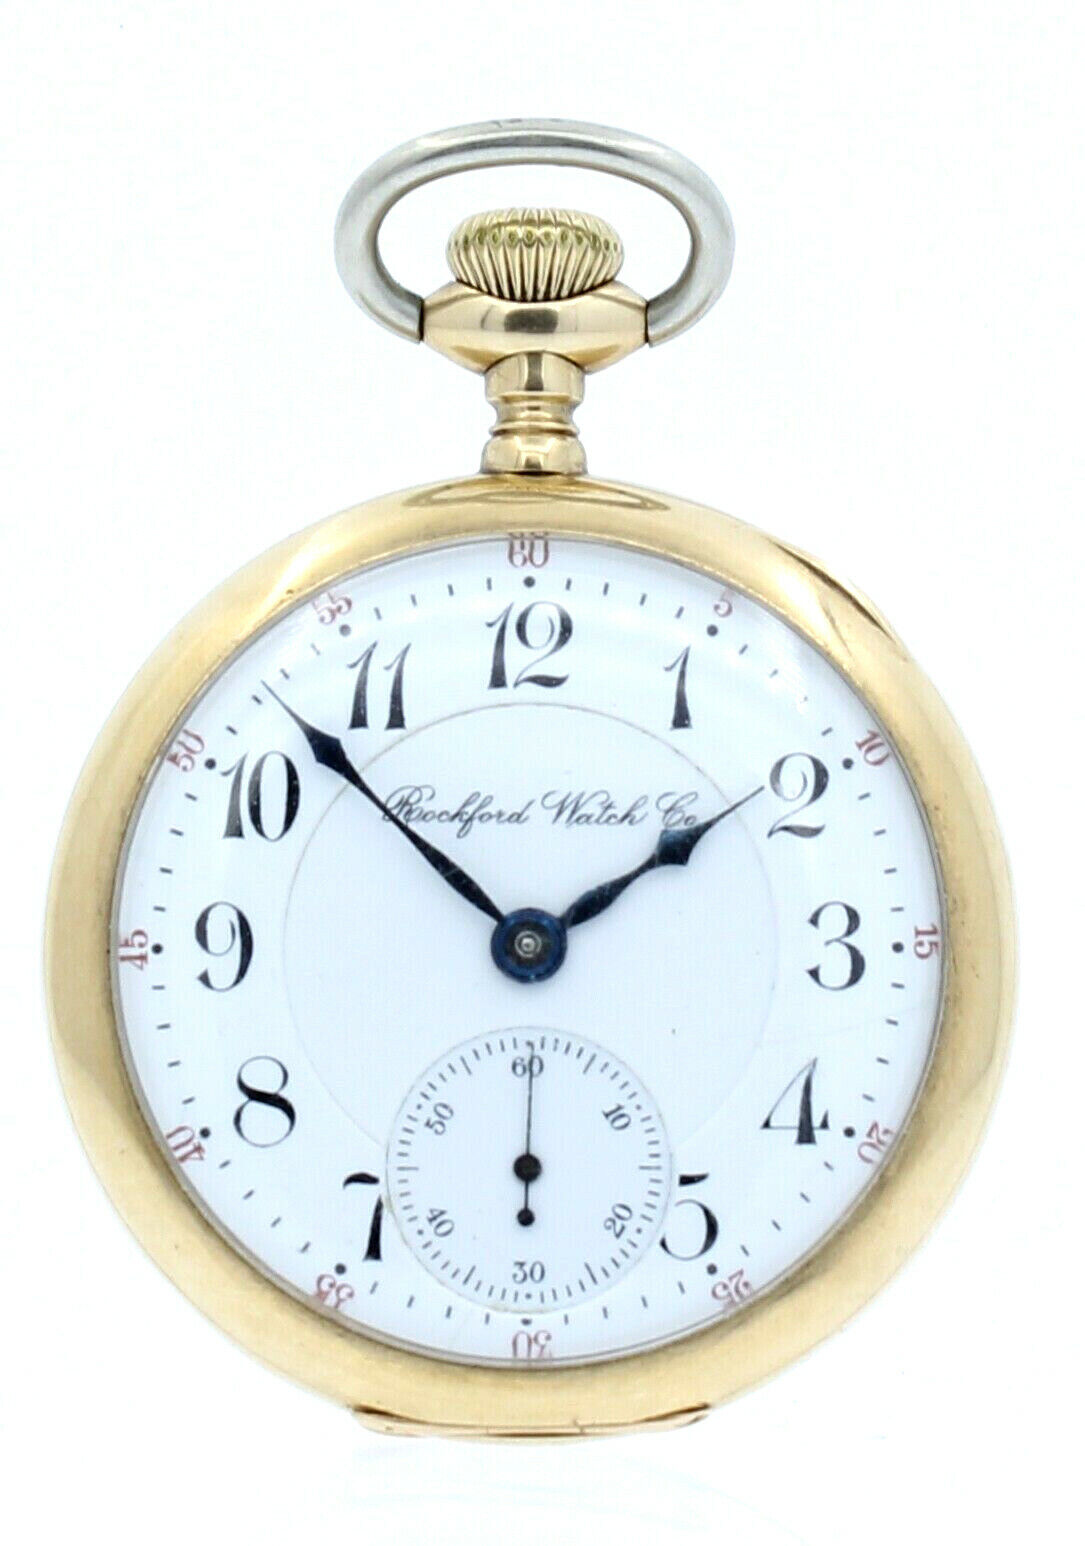 AMAZING Rockford Watch Co Solid 14K Yellow Gold 17J Pocket Watch 90.8 Grams 